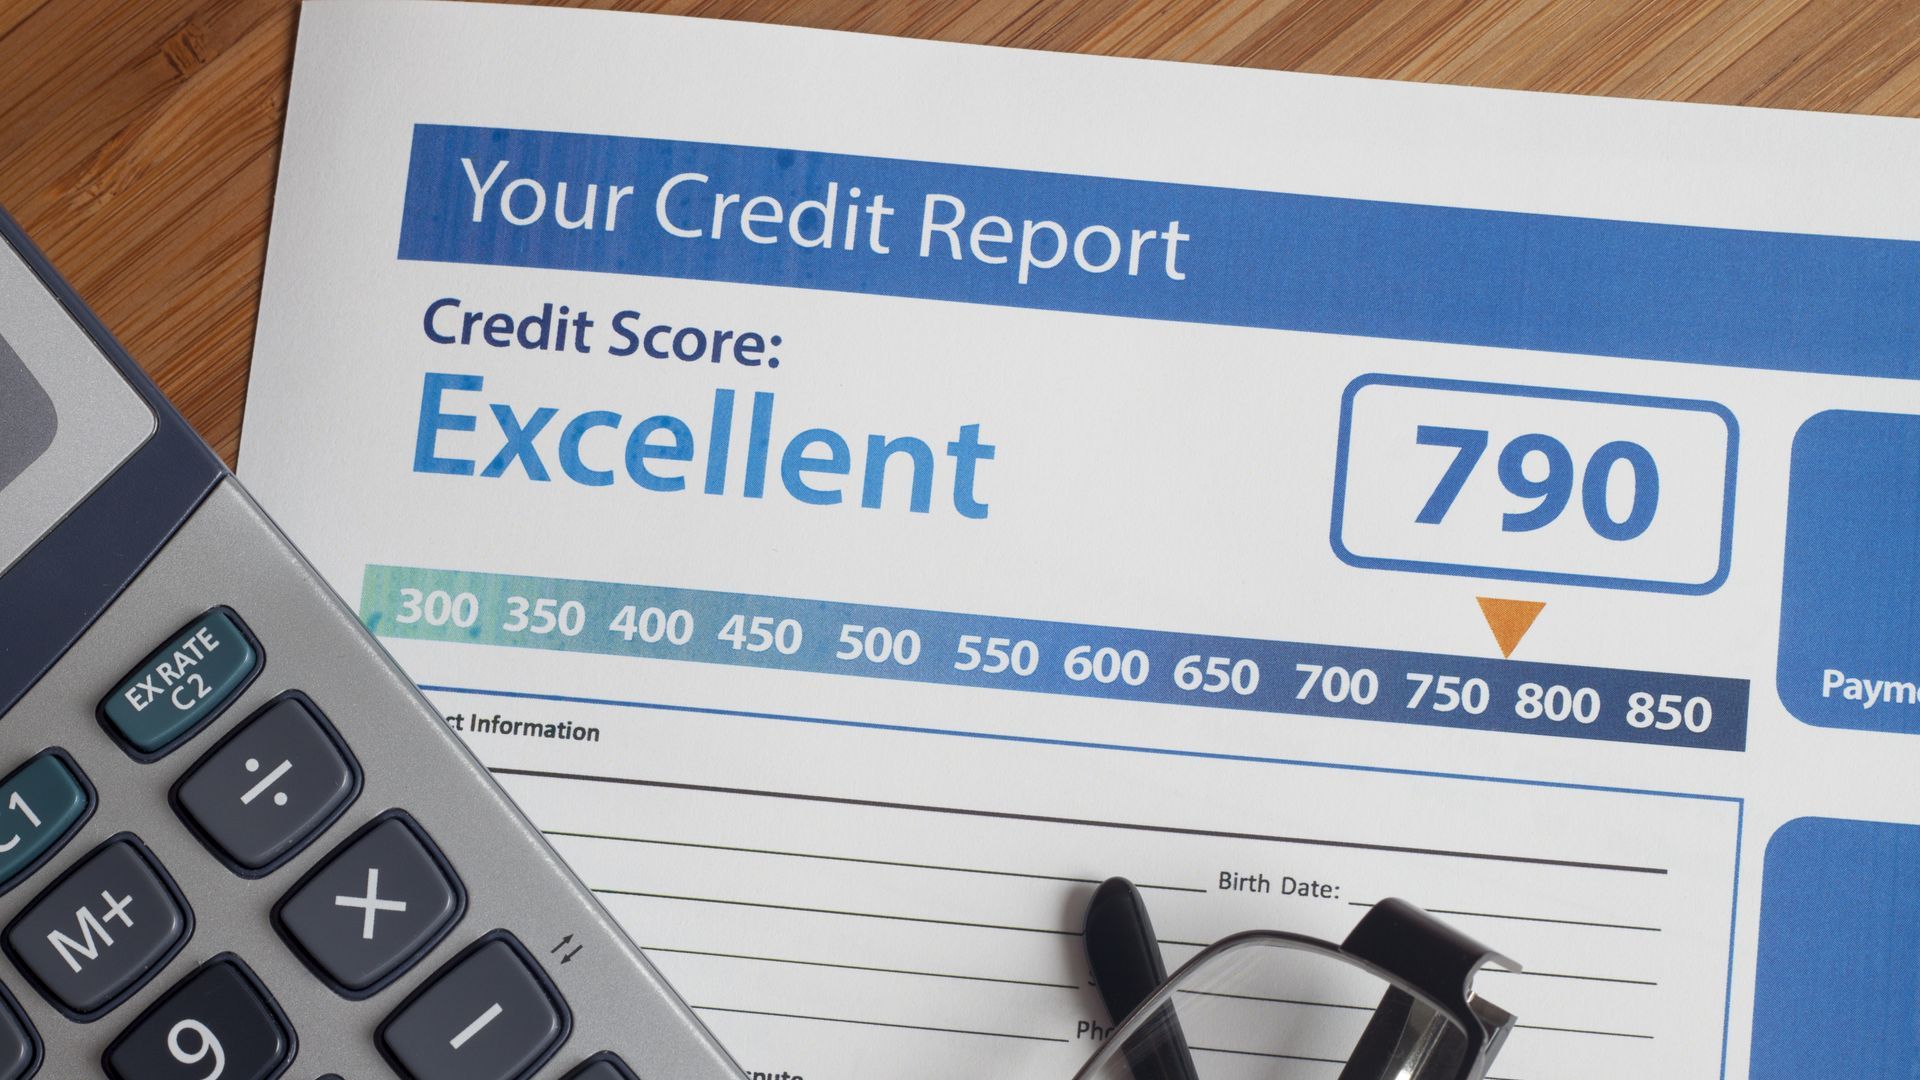 document with a high credit score printed on it